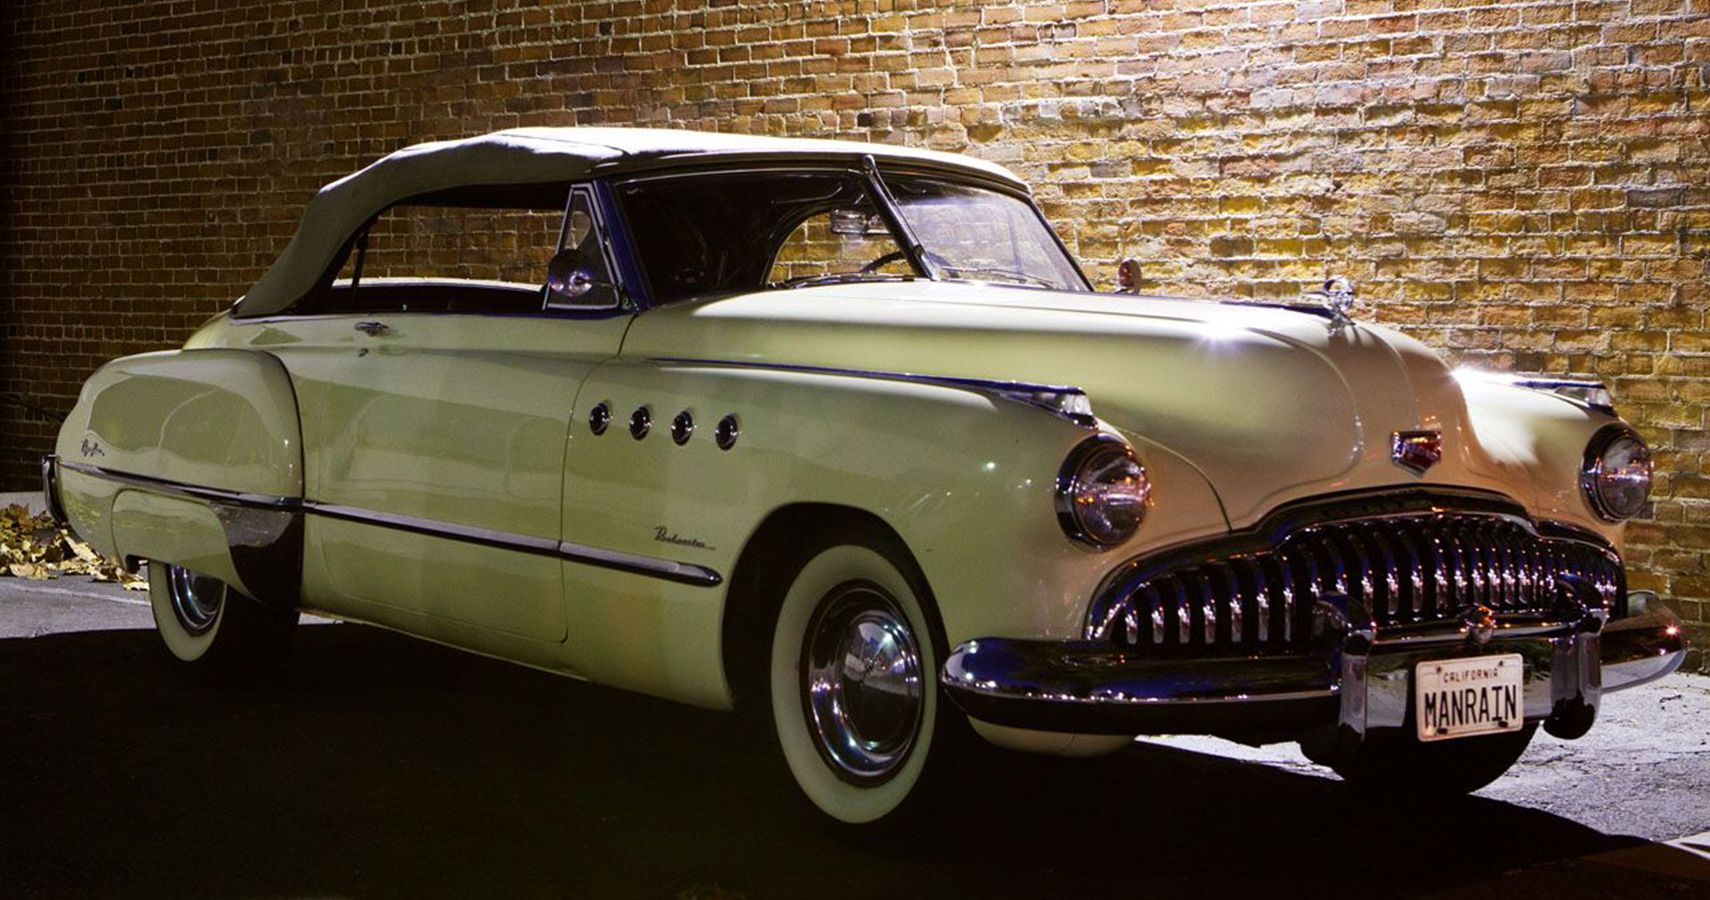 The Roadmaster Got It's First Extensive Post-War Restyling In 1949, With A Curved Windshield, And An Even More Iconic Front Grille